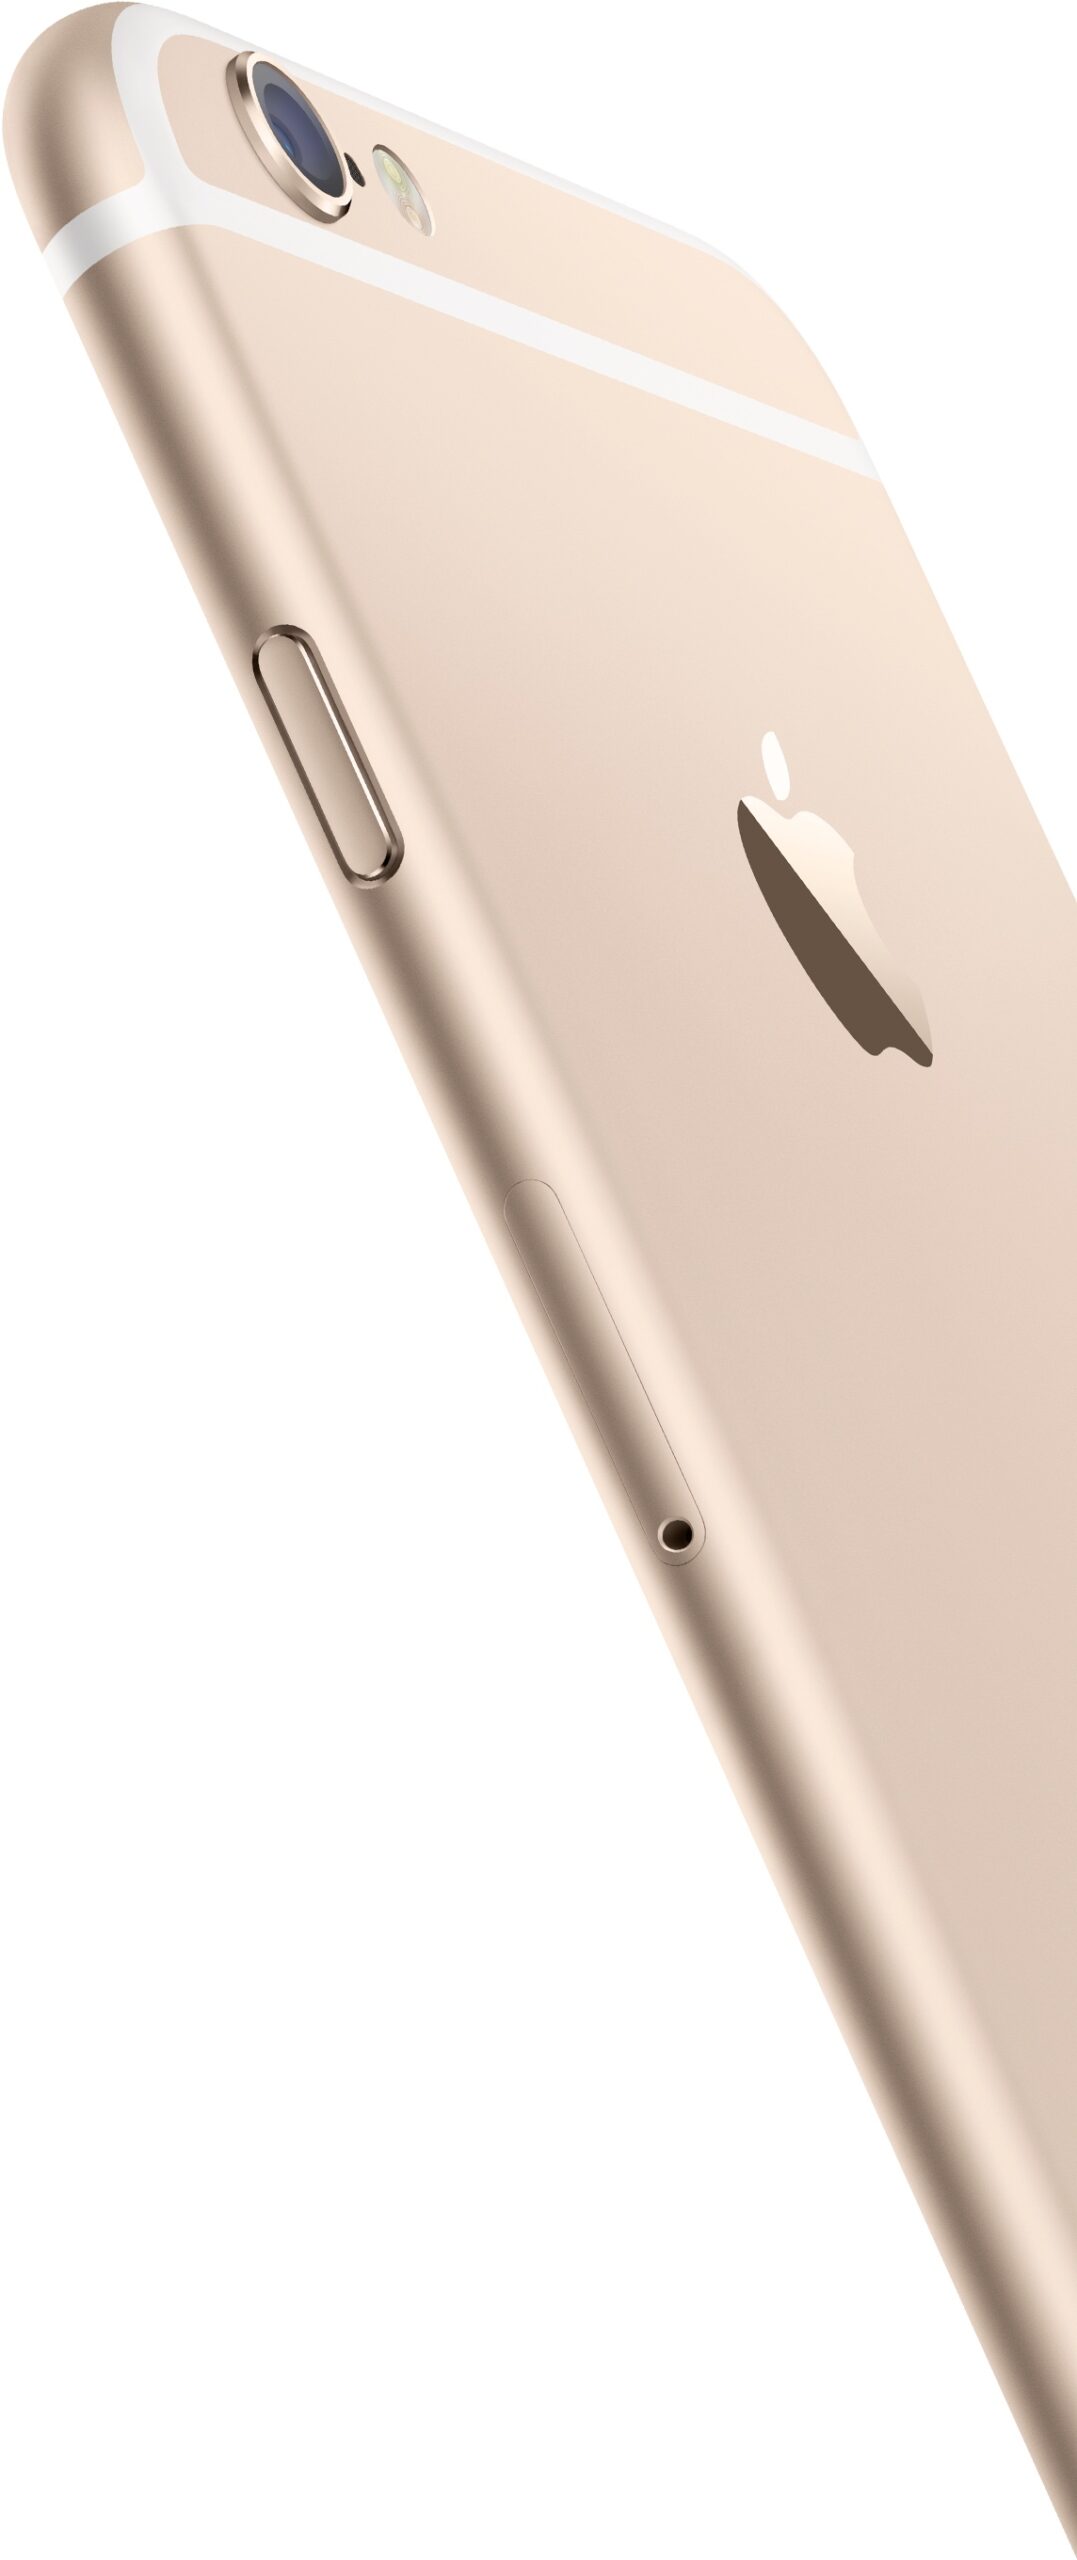 Questions and clarifications about Apple's recalls (iPhone 6 Plus camera and Beats Pill XL)